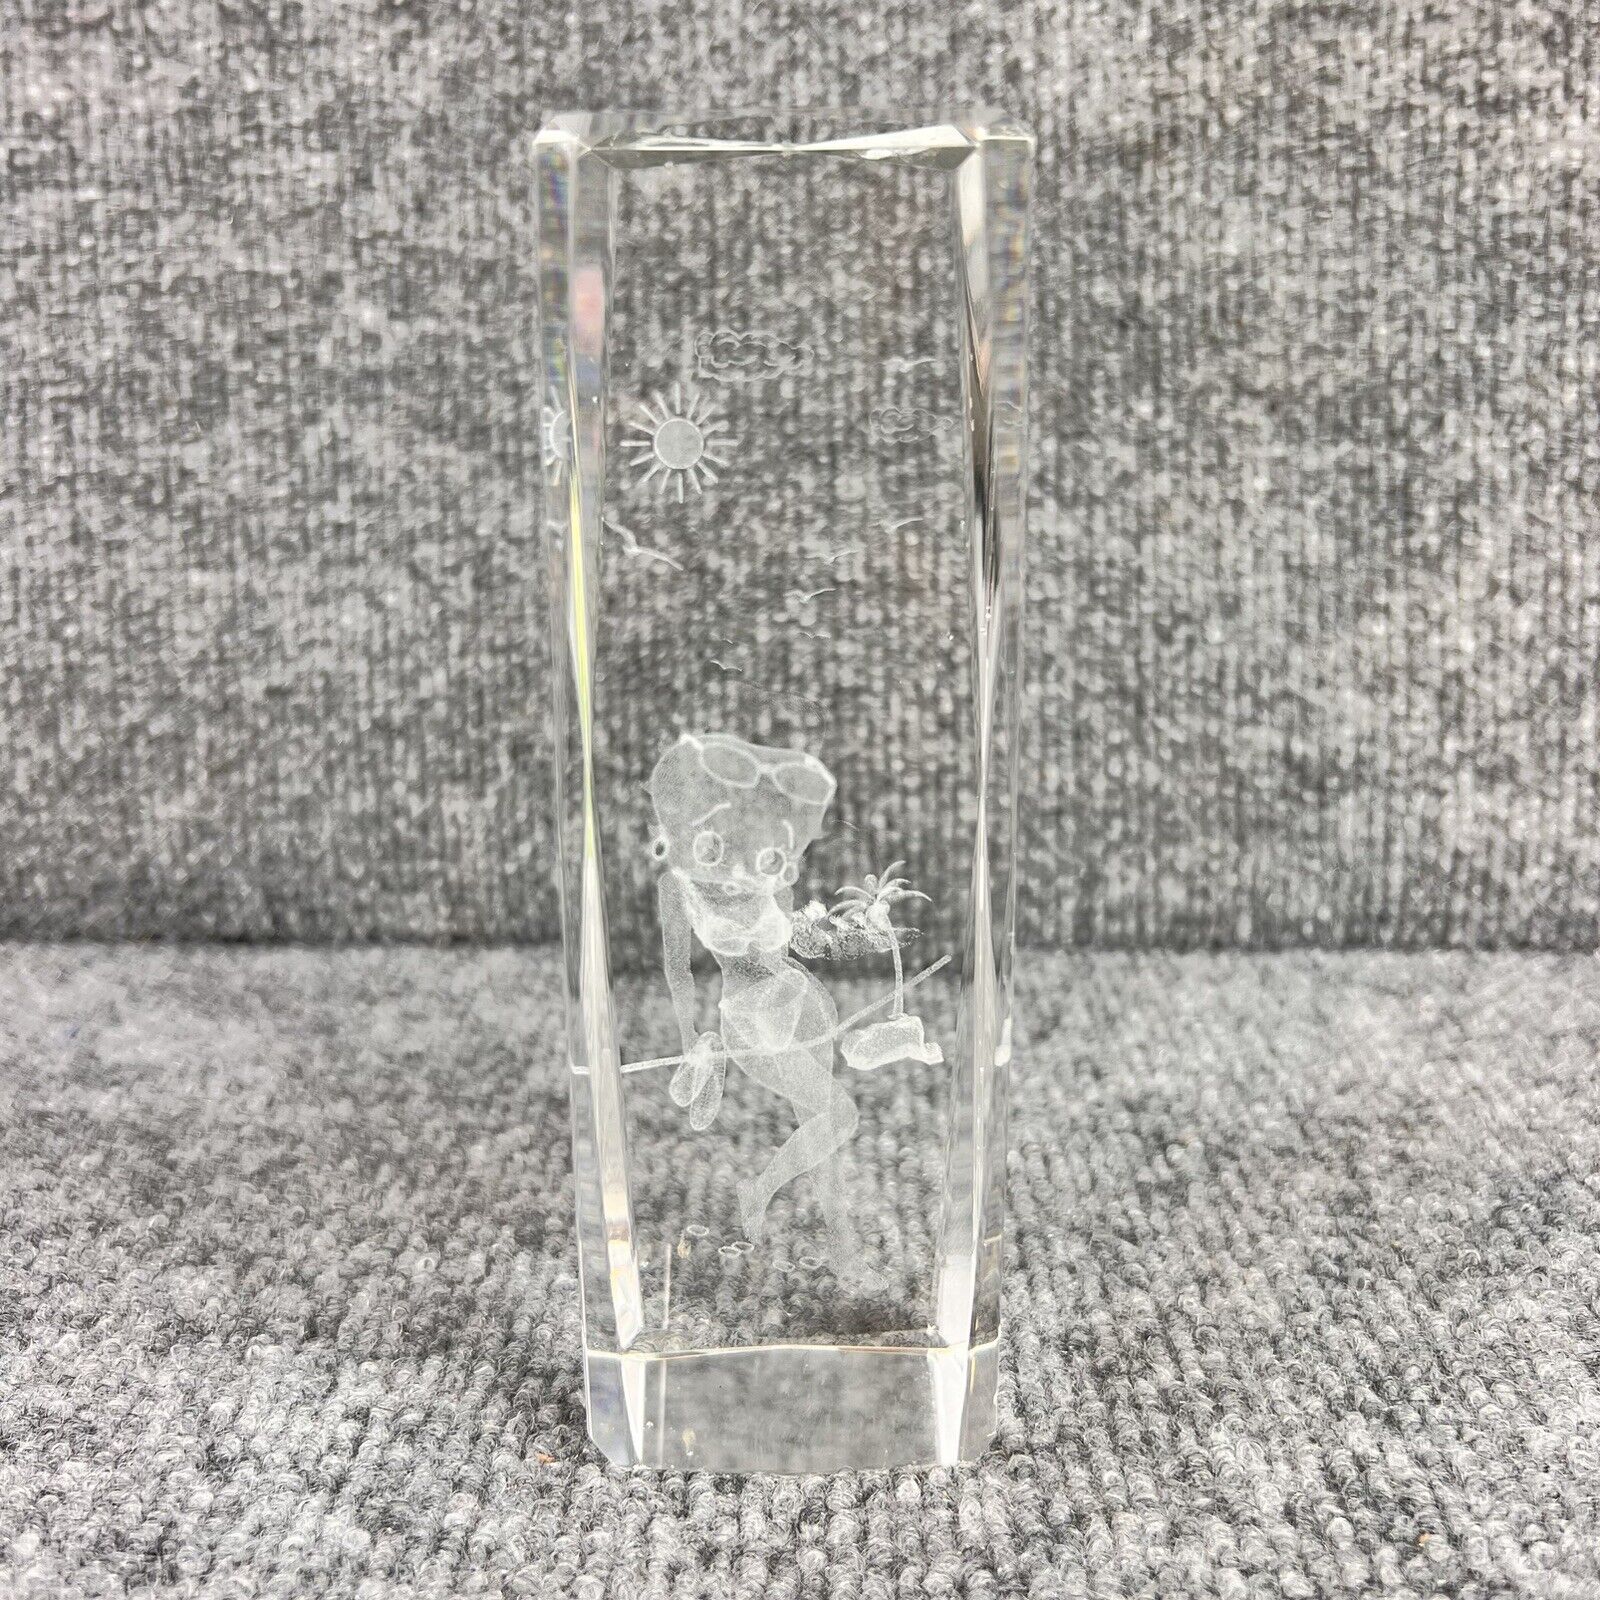 VTG Betty Boop 3D Laser Etched Crystal Glass Paperweight Display Hologram Style